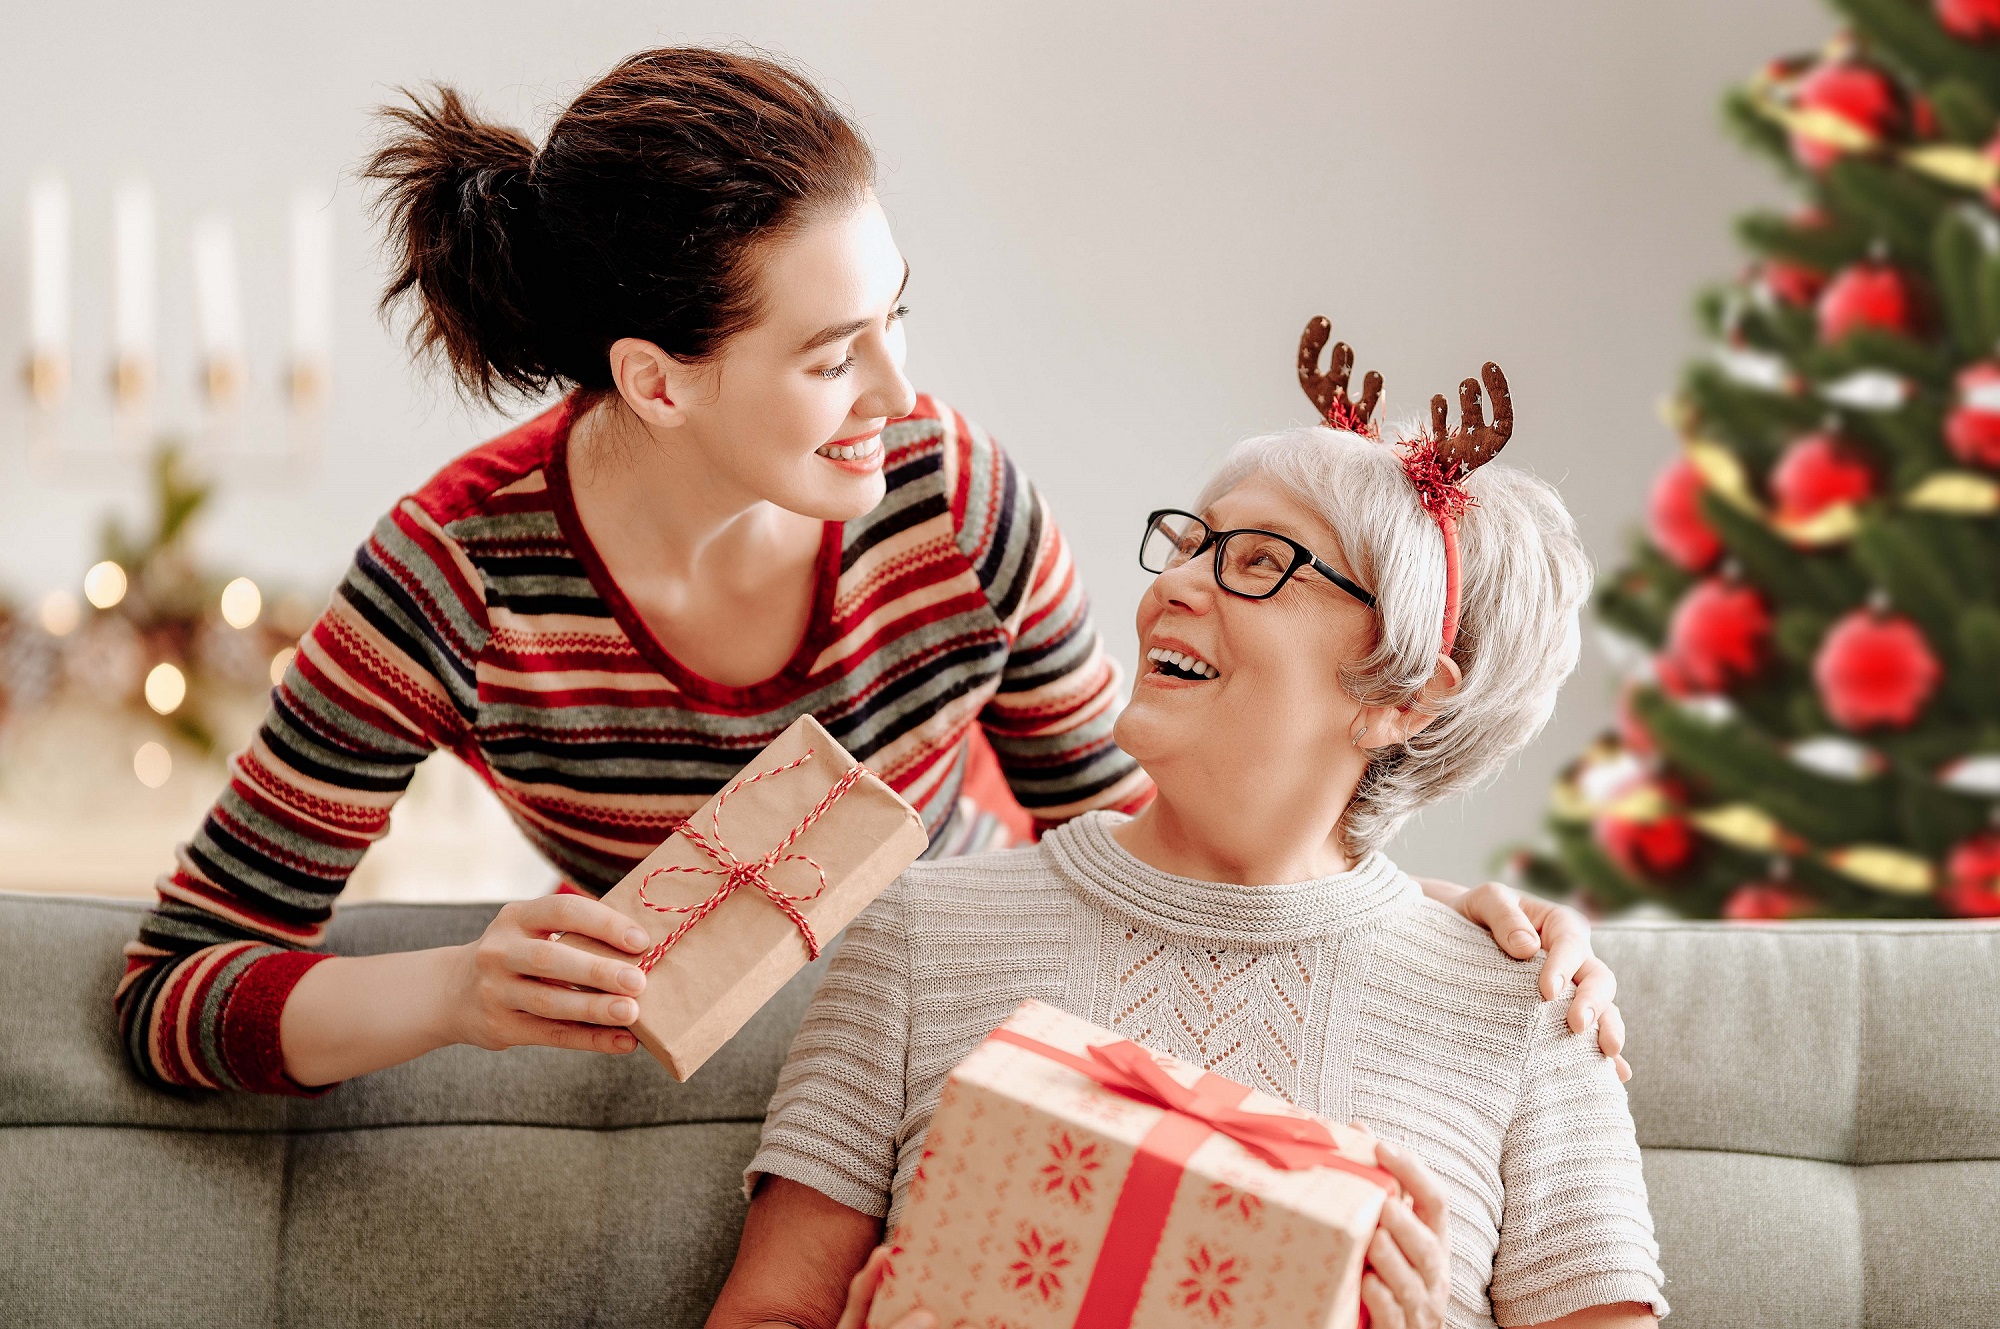 A loving daughter surprises her mom with a Christmas gift. 